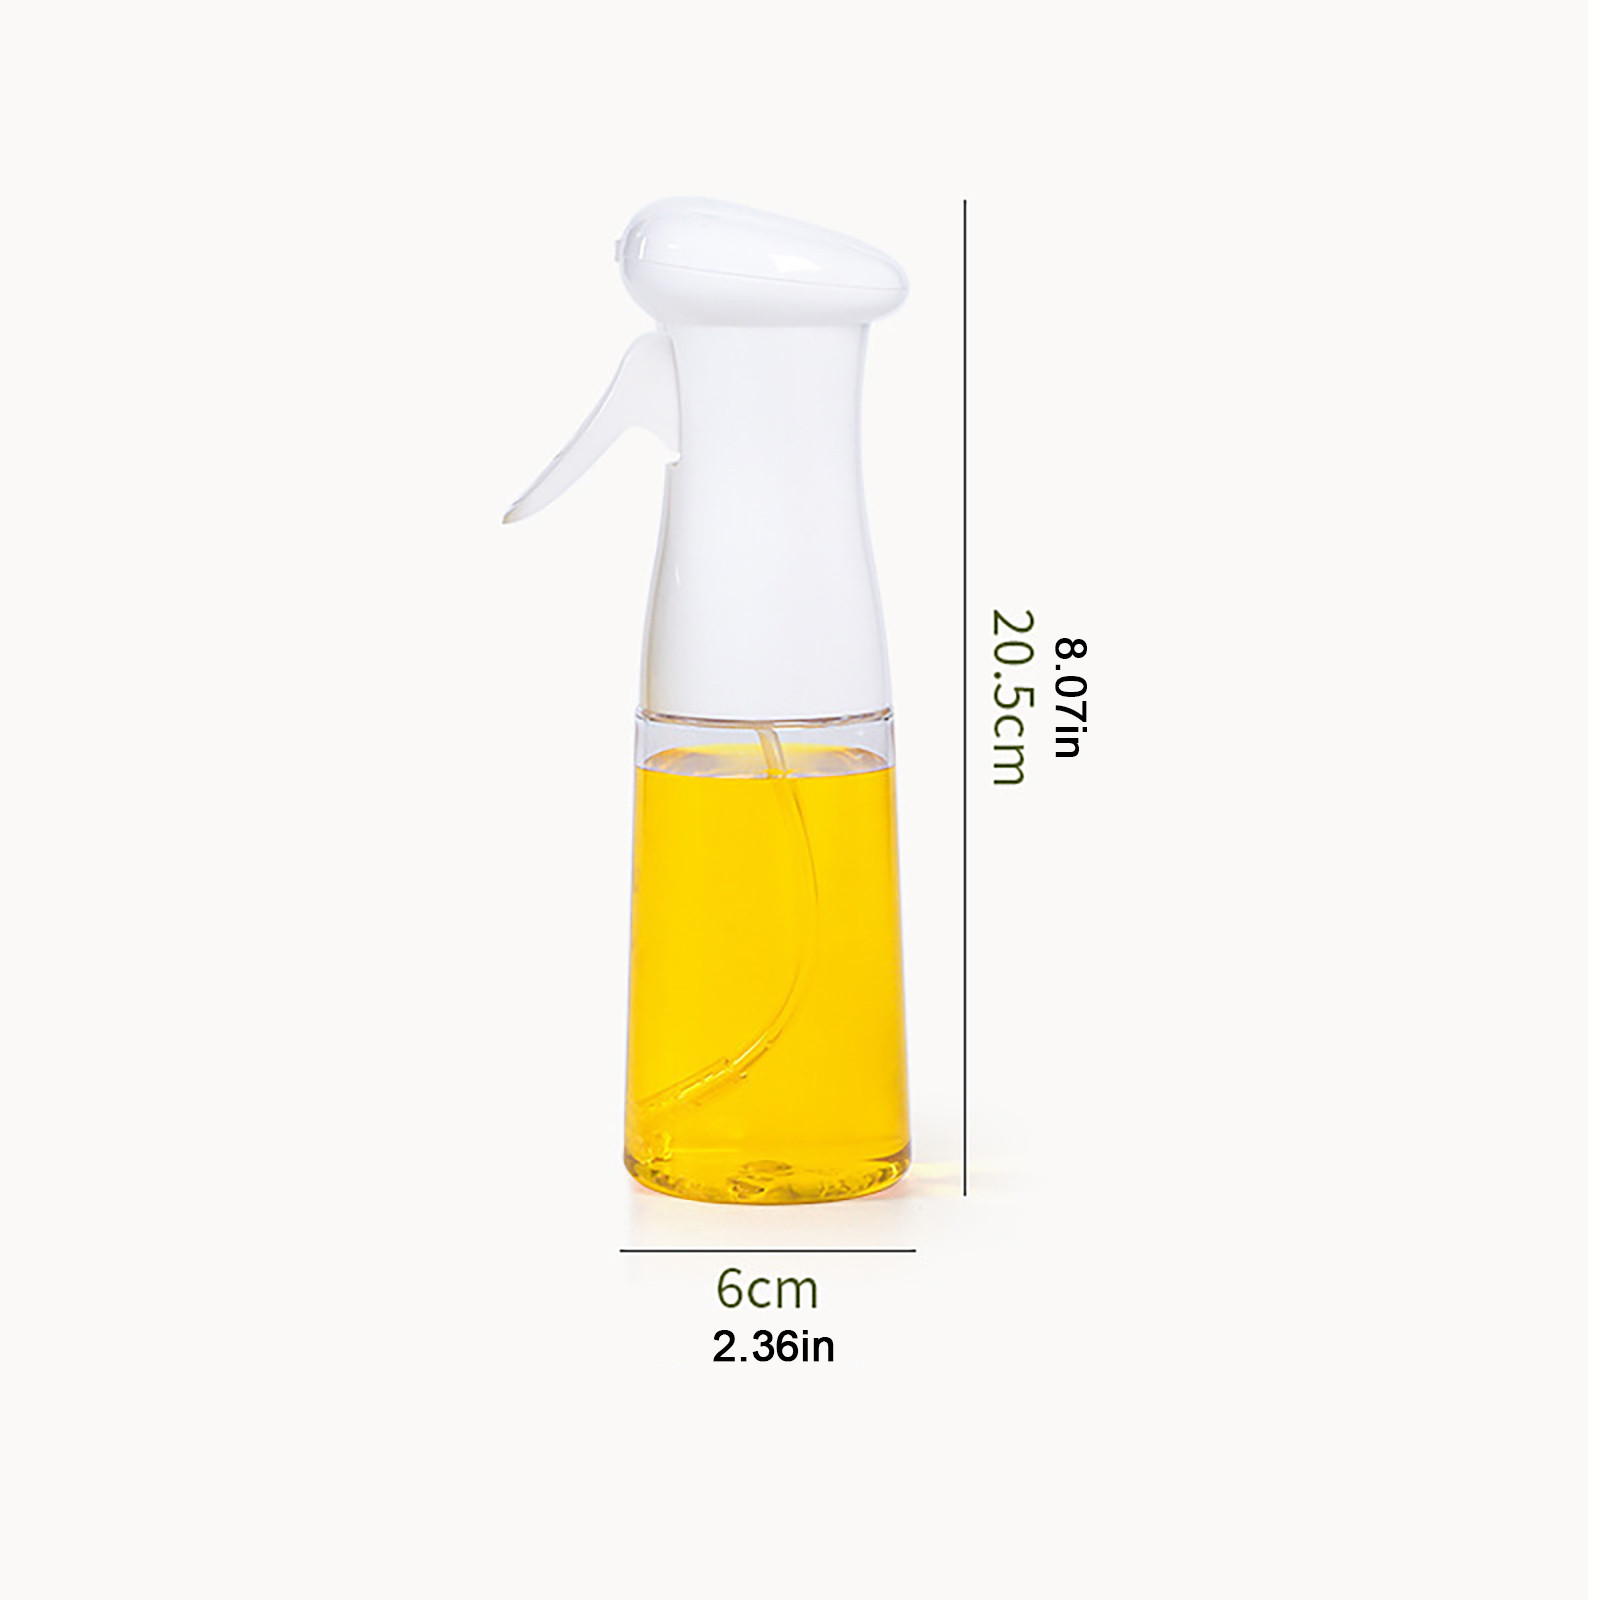 1pc210ml olive oil sprayer home kitchen cooking sauce vinegar portable dispenser home party homemade gourmet barbecue oiler